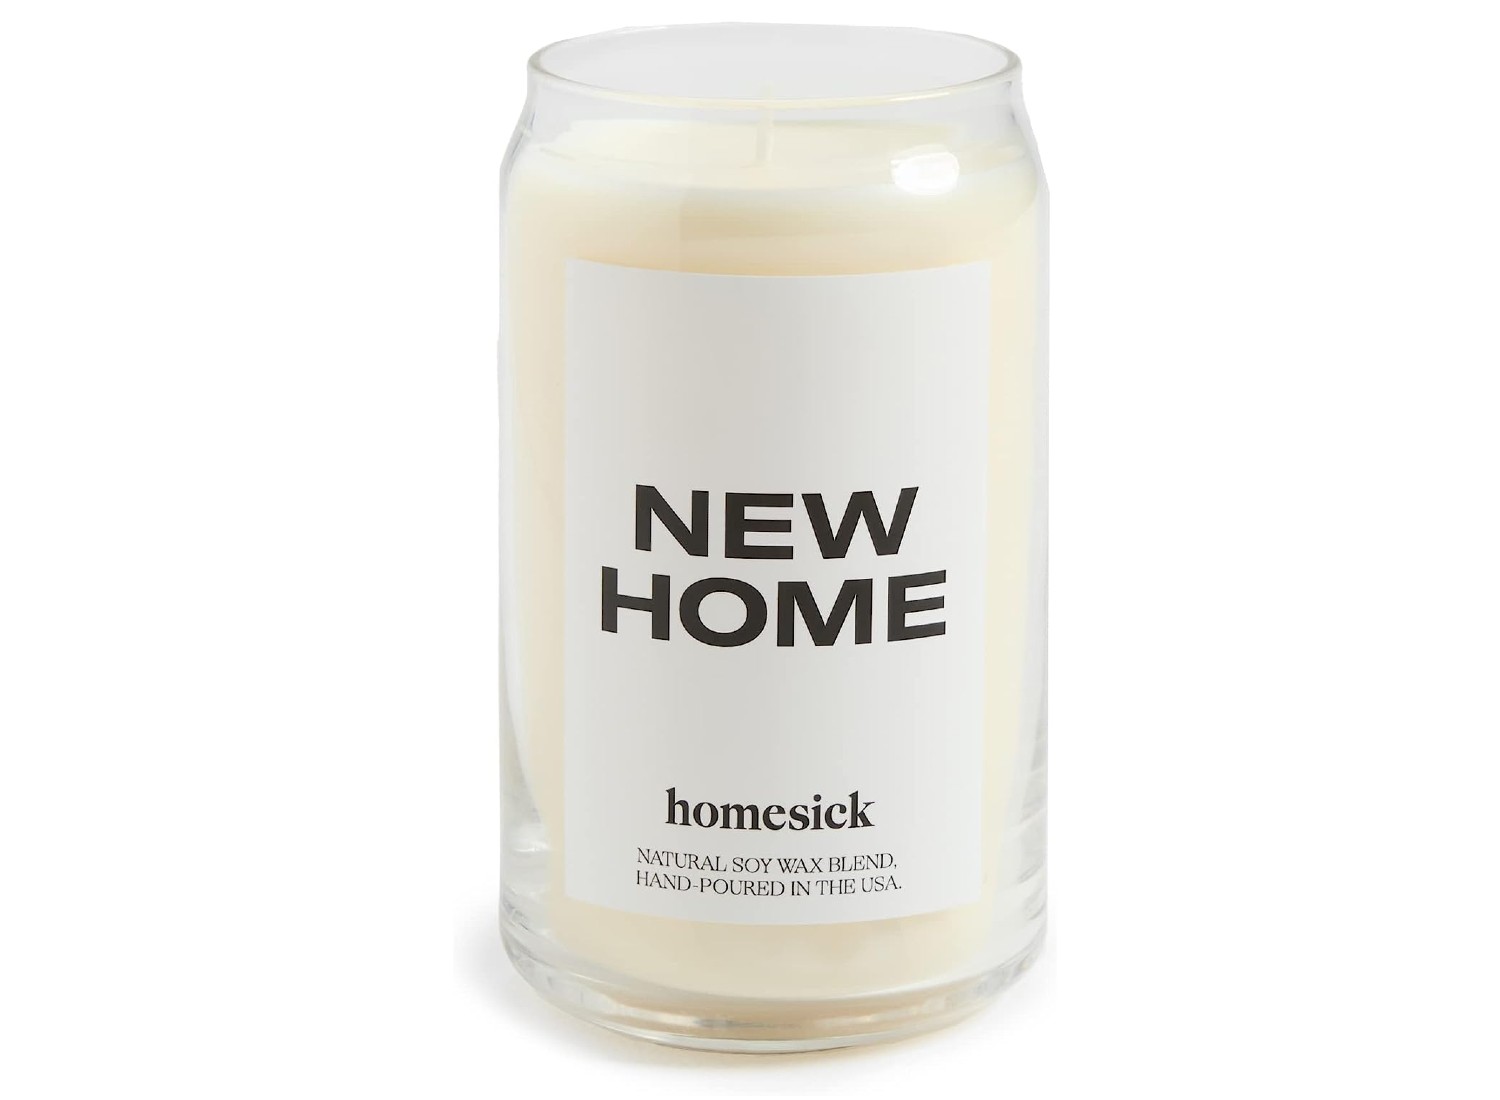 Homesick New Home Scented Candle